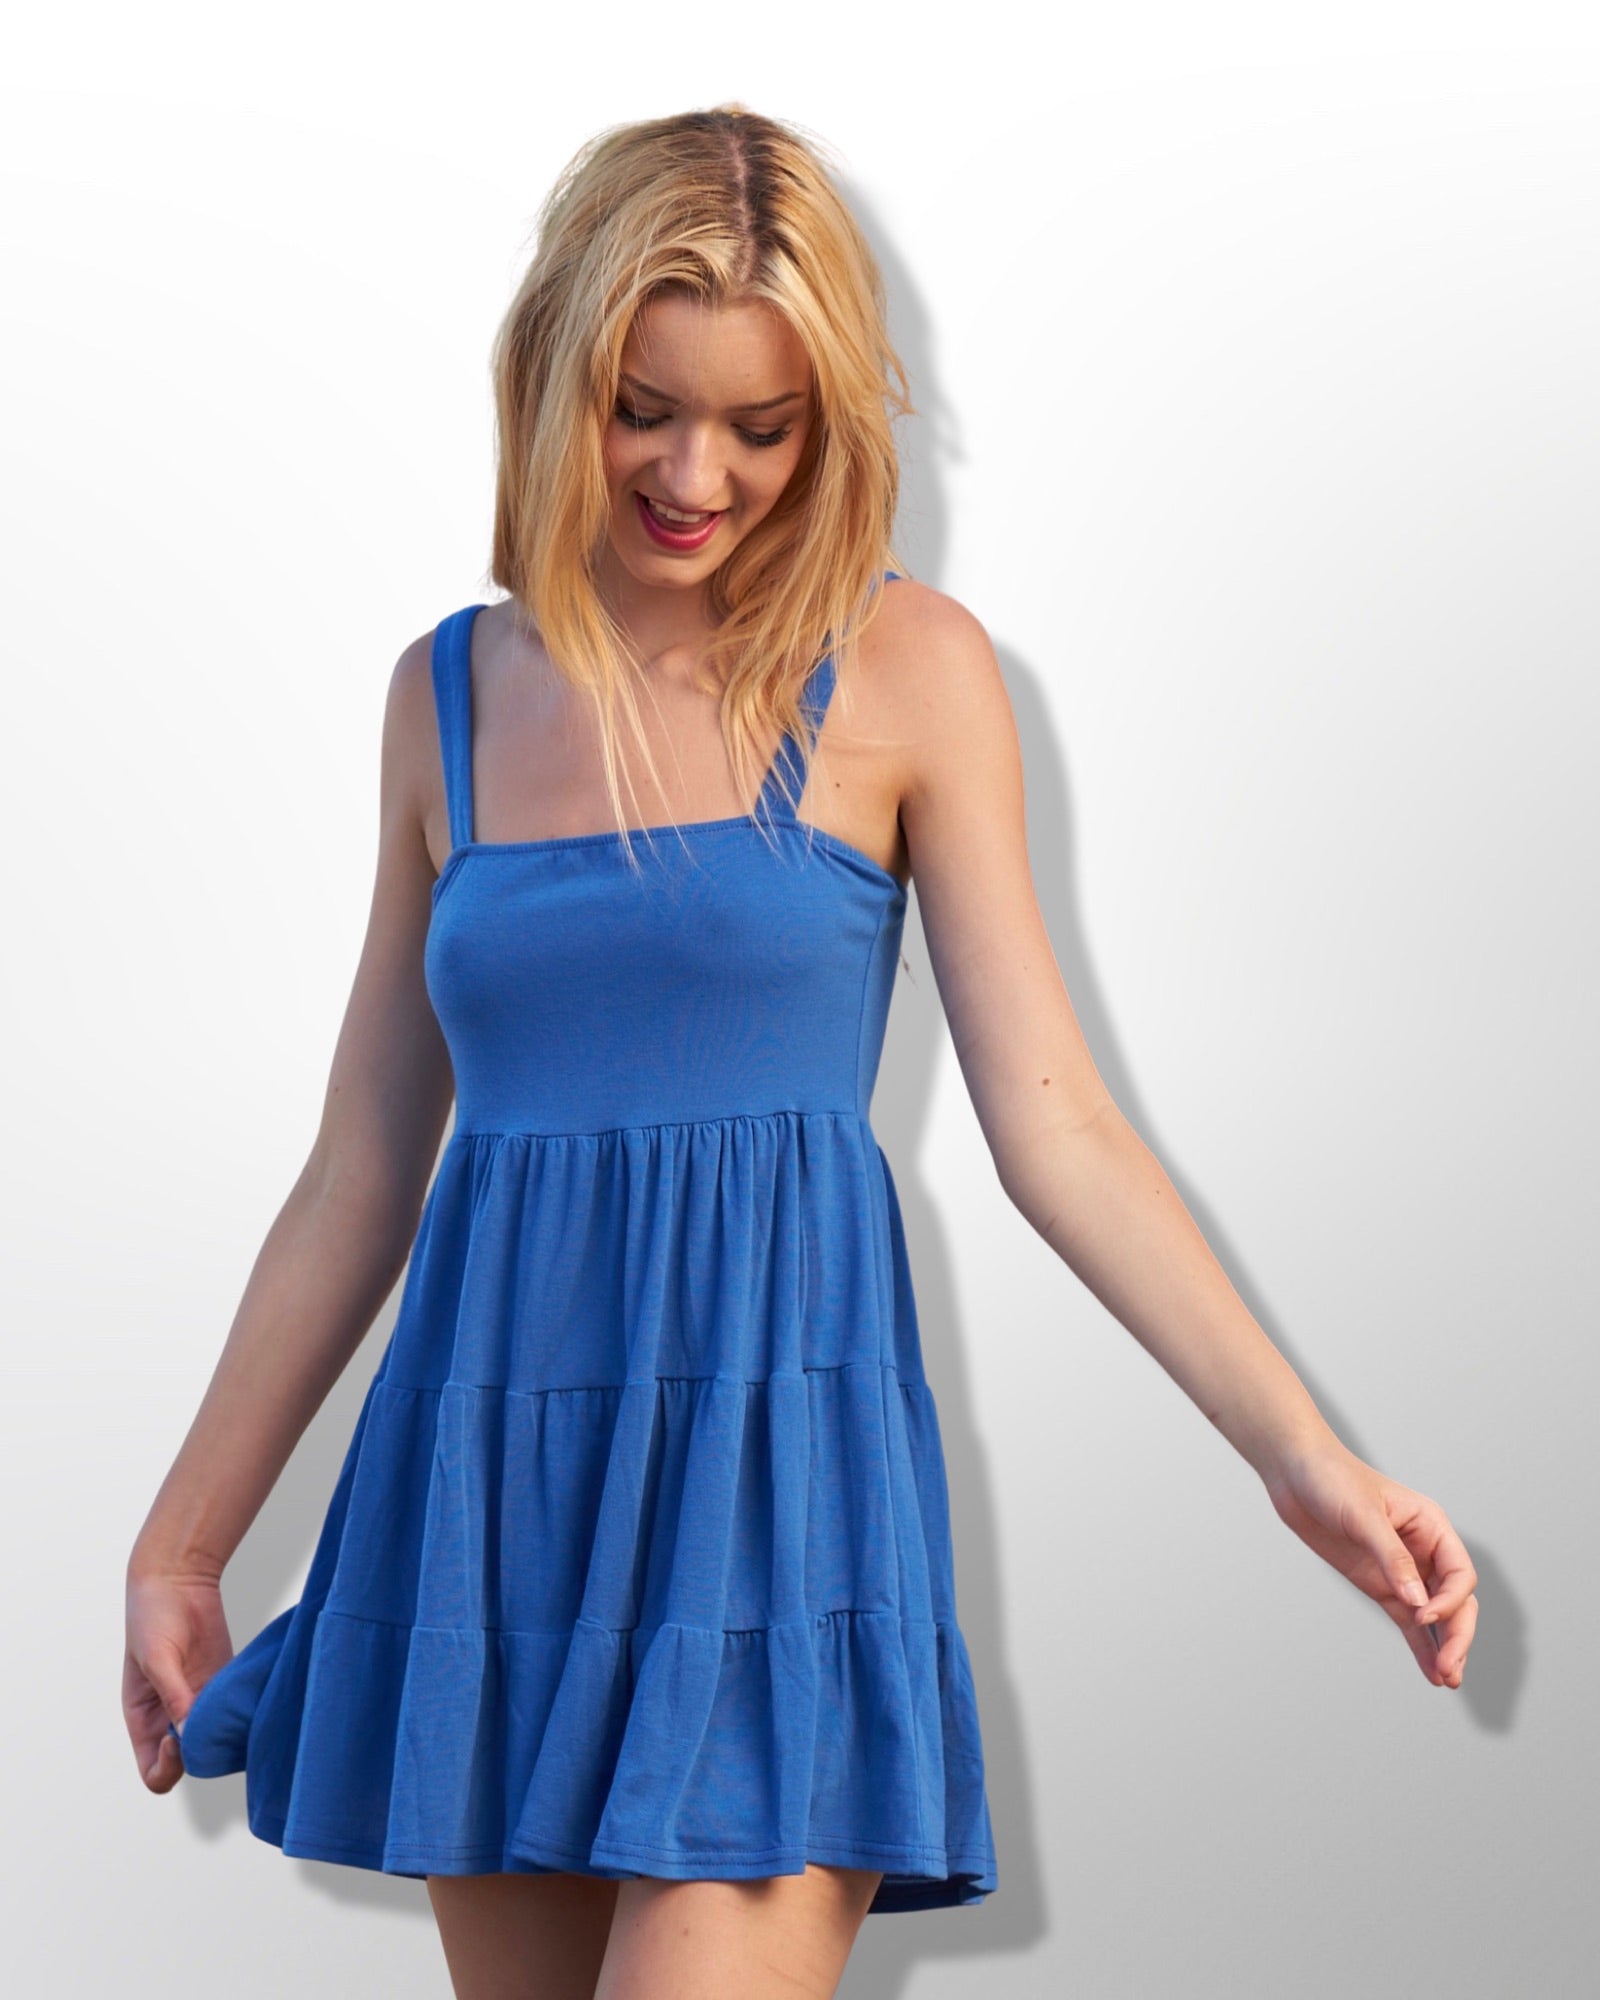 Beautiful baby doll dress for adults